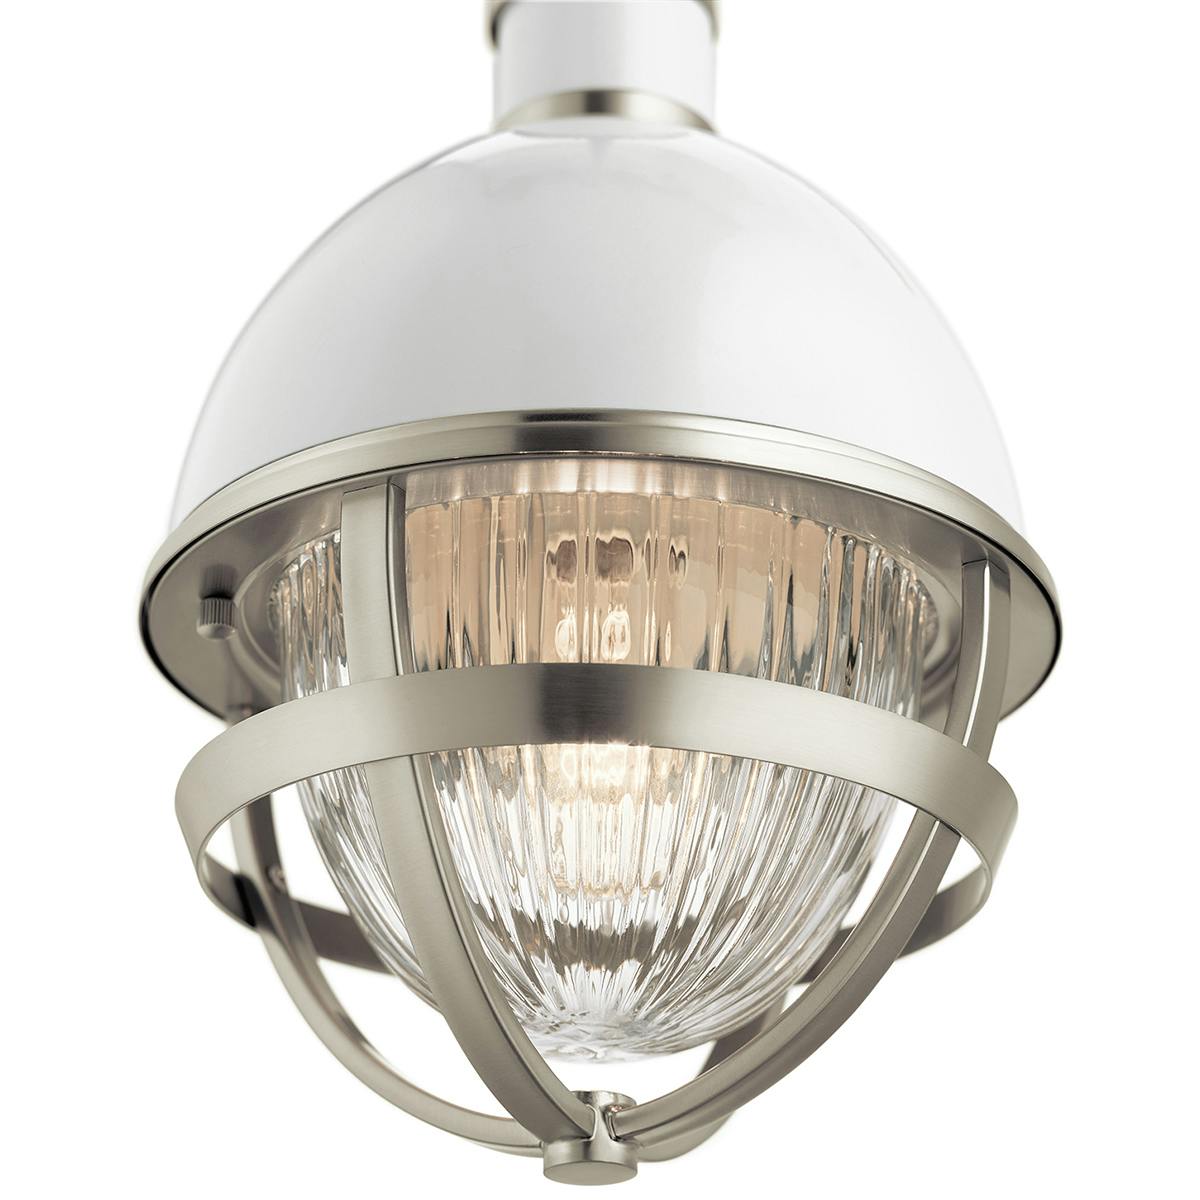 Close up view of the Tollis 12.5" 1 Light Mini Pendant Nickel on a white background